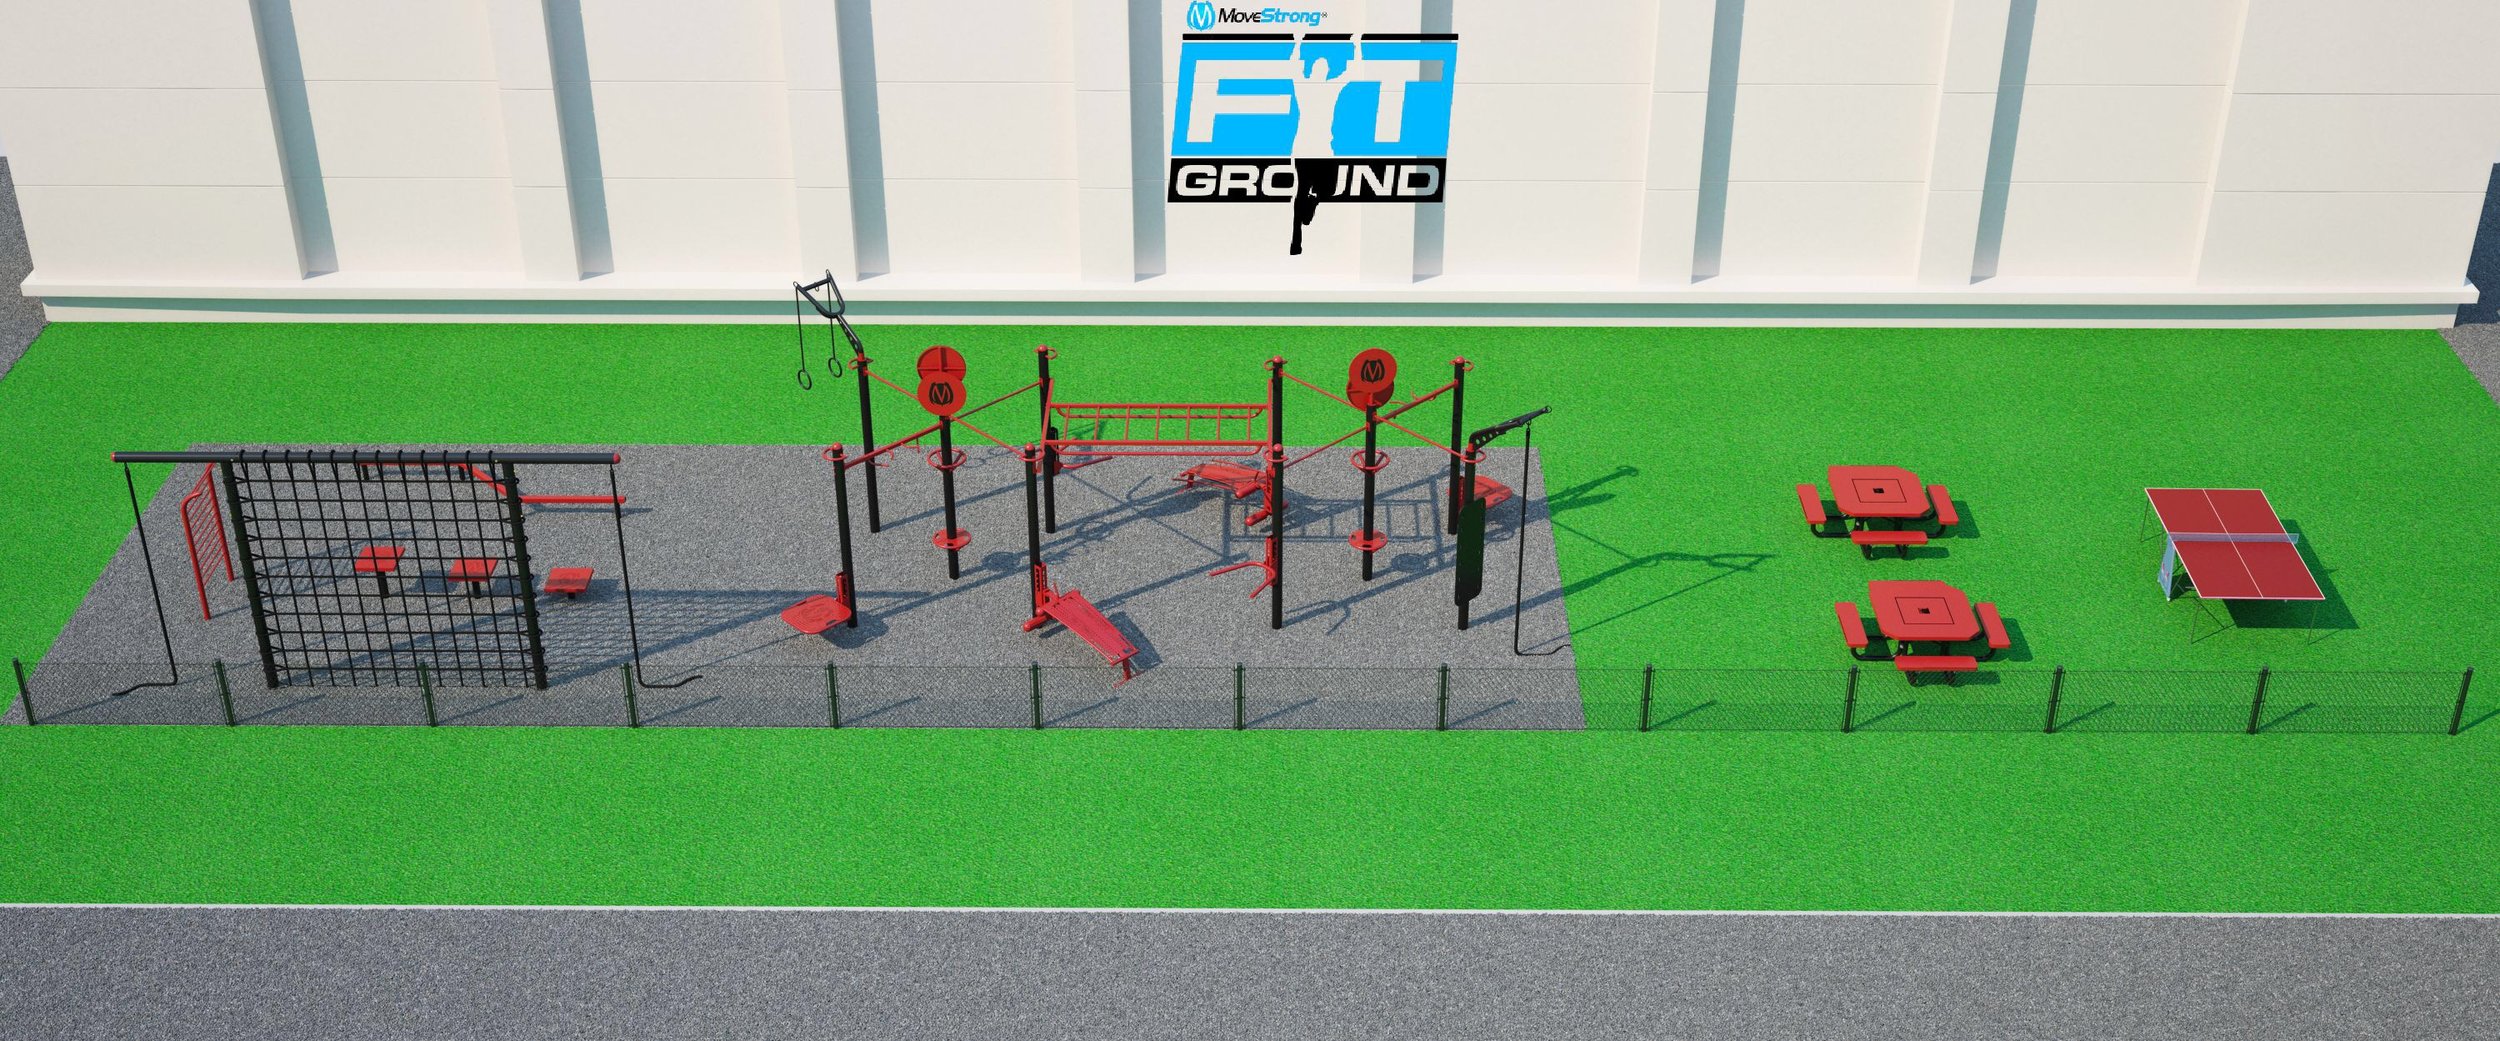 MoveStrong FitGround layout